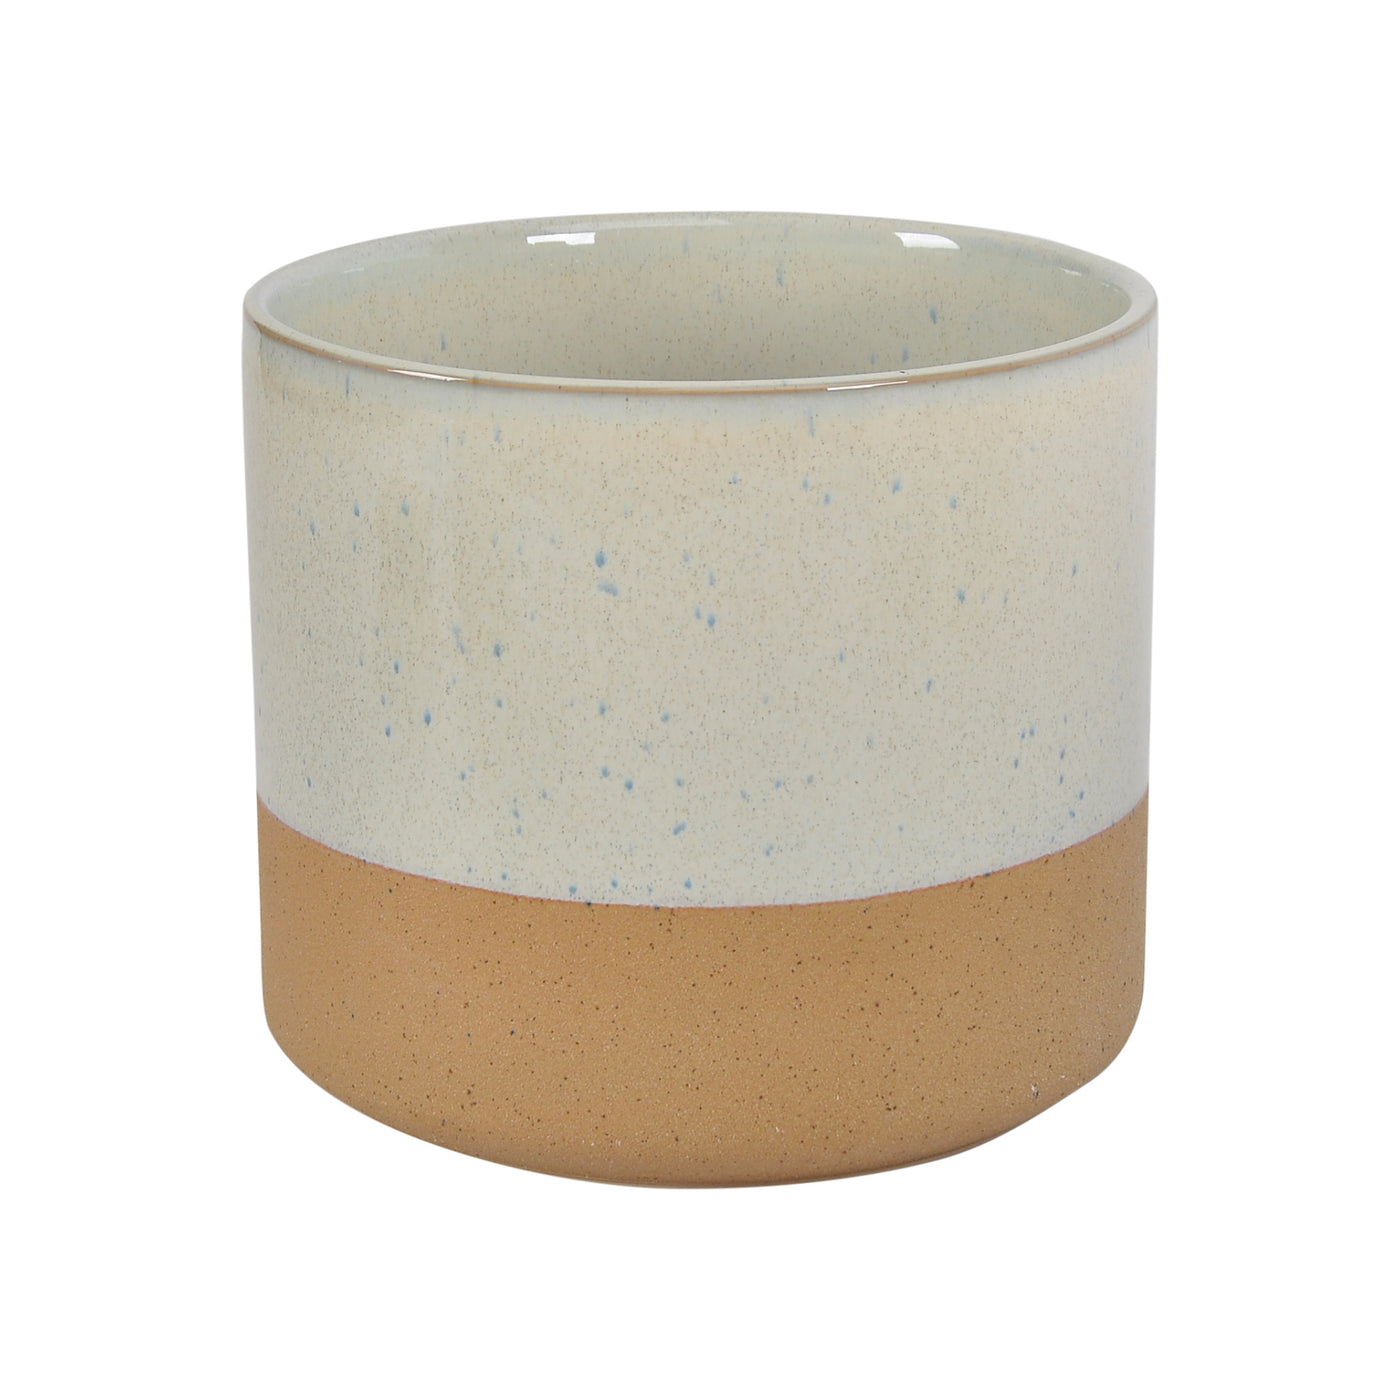 Love a little eye-pleasing texture? Bring more of the outdoors in with Rustica, our ceramic planter that features calming,...